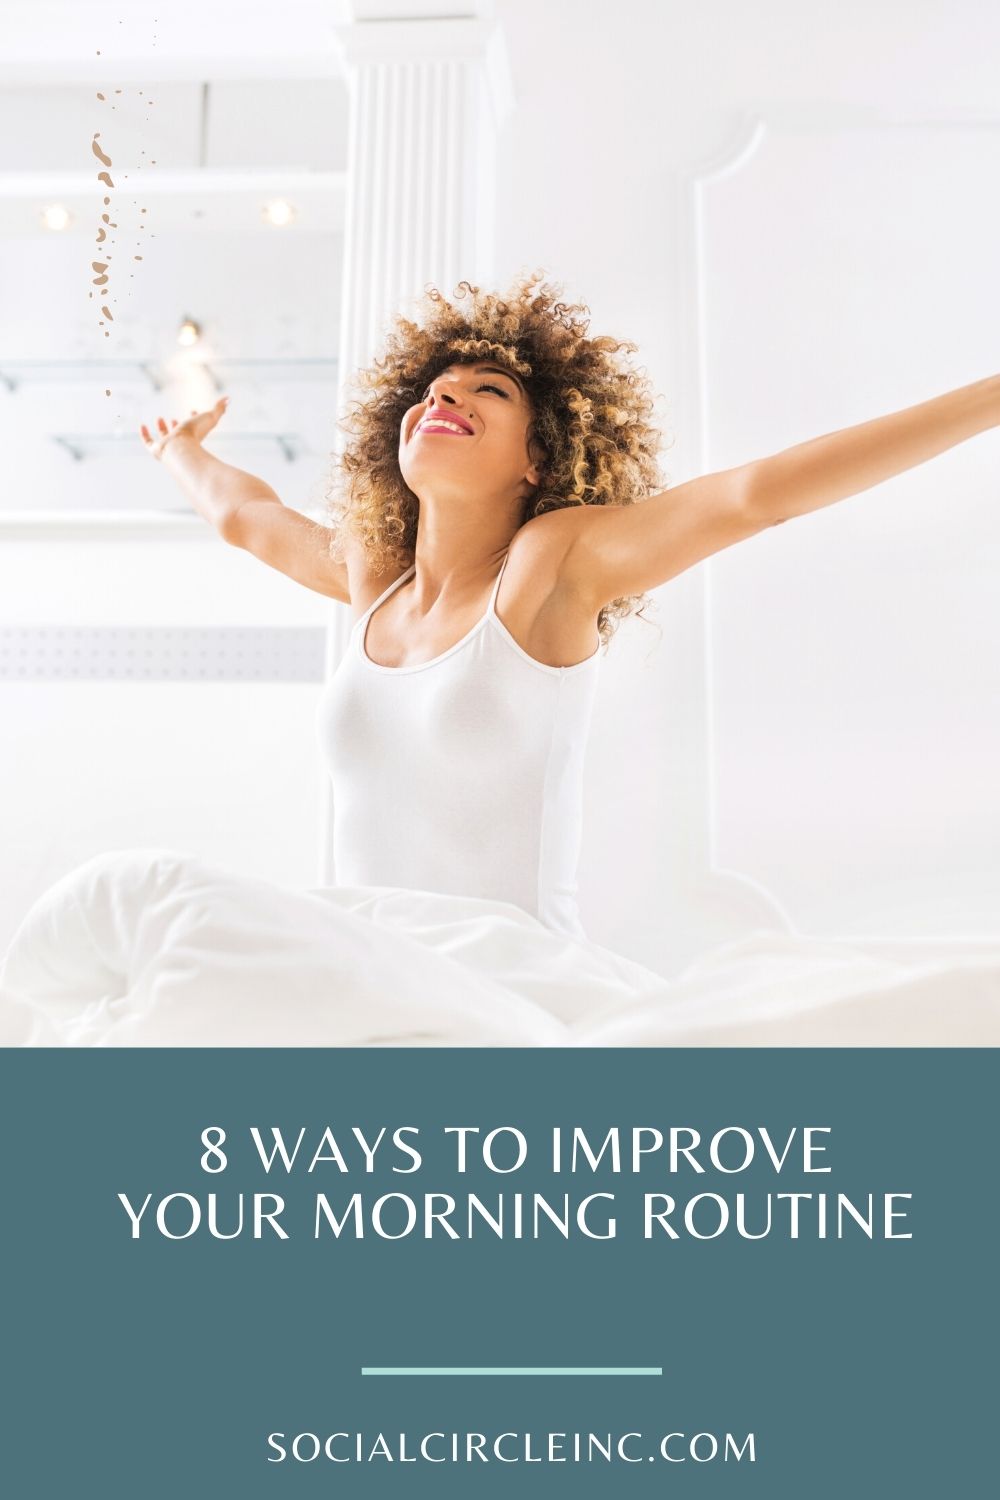 8 Ways to Improve Your Morning Routine